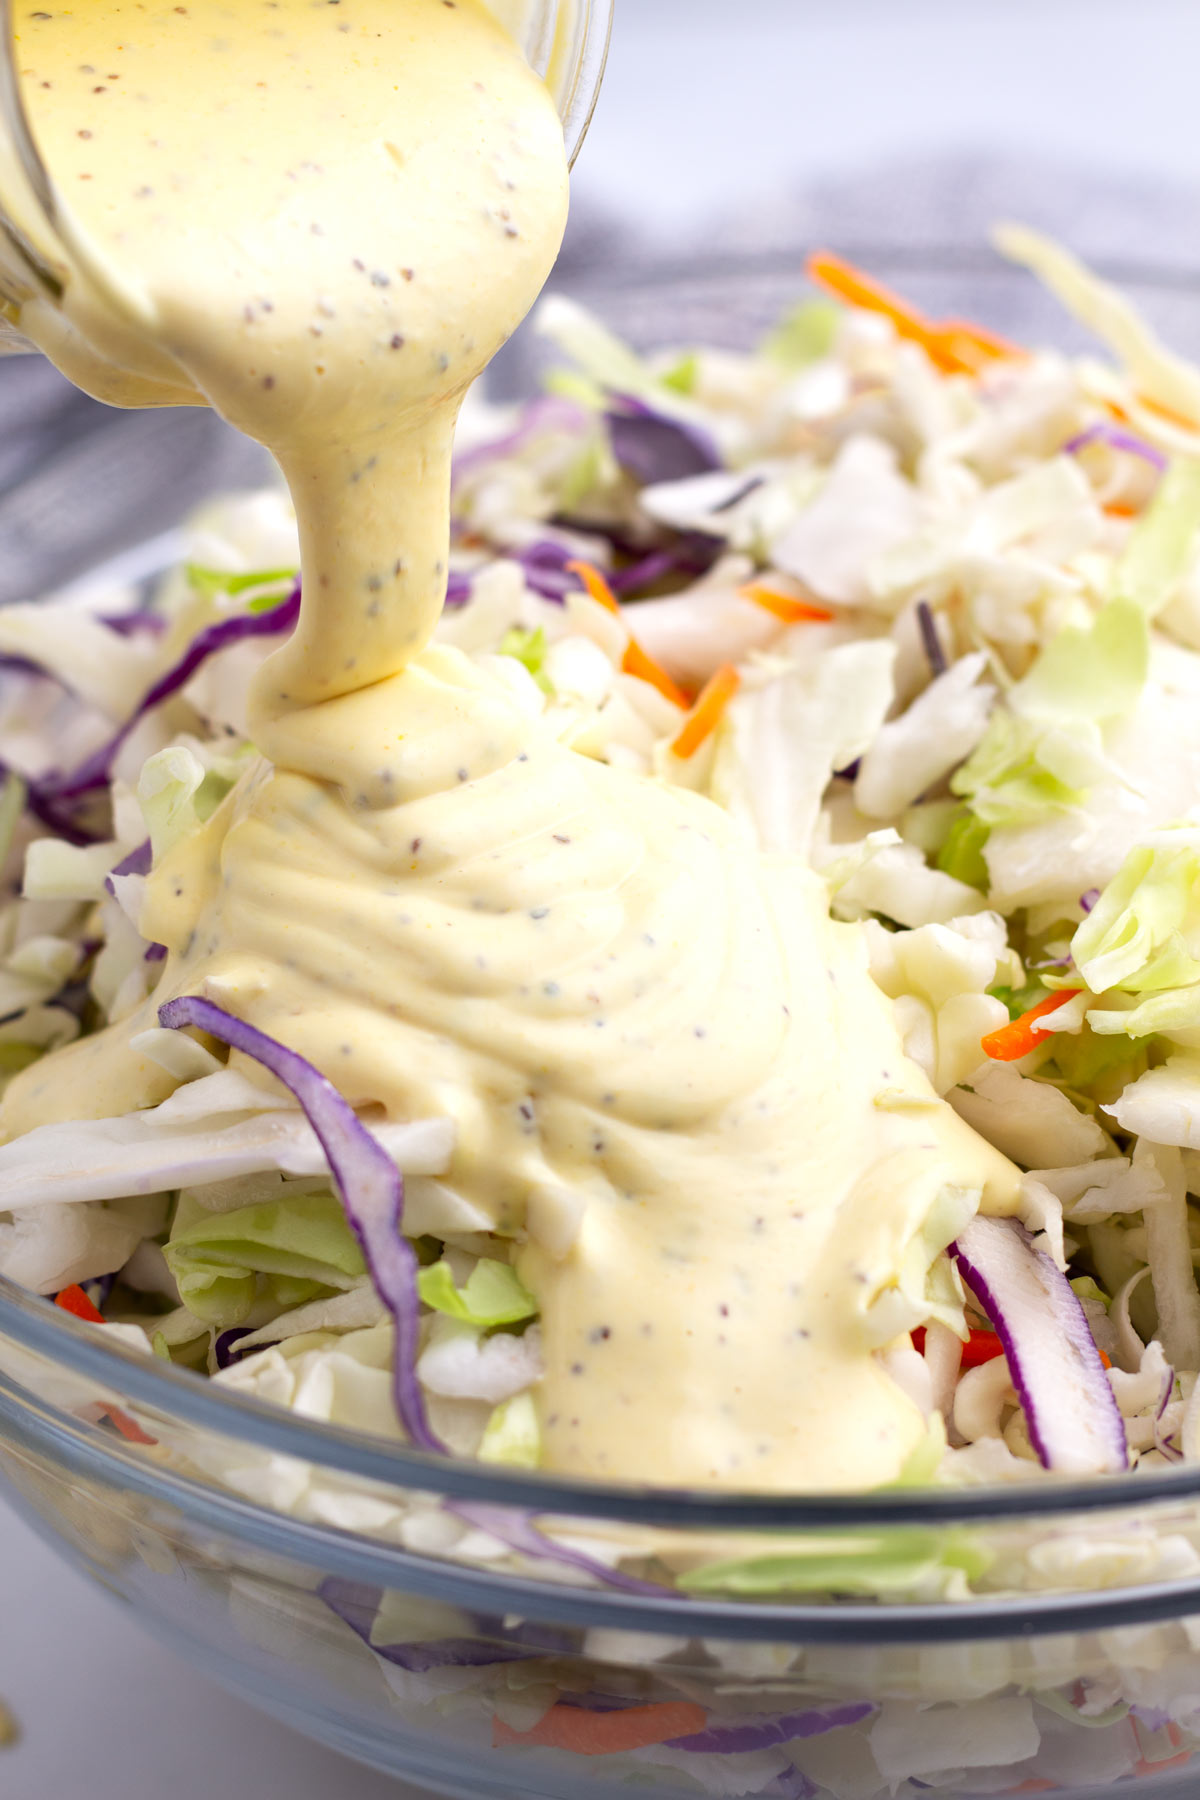 Jar with thick amount of dressing pouring over the top of bagged coleslaw mix.